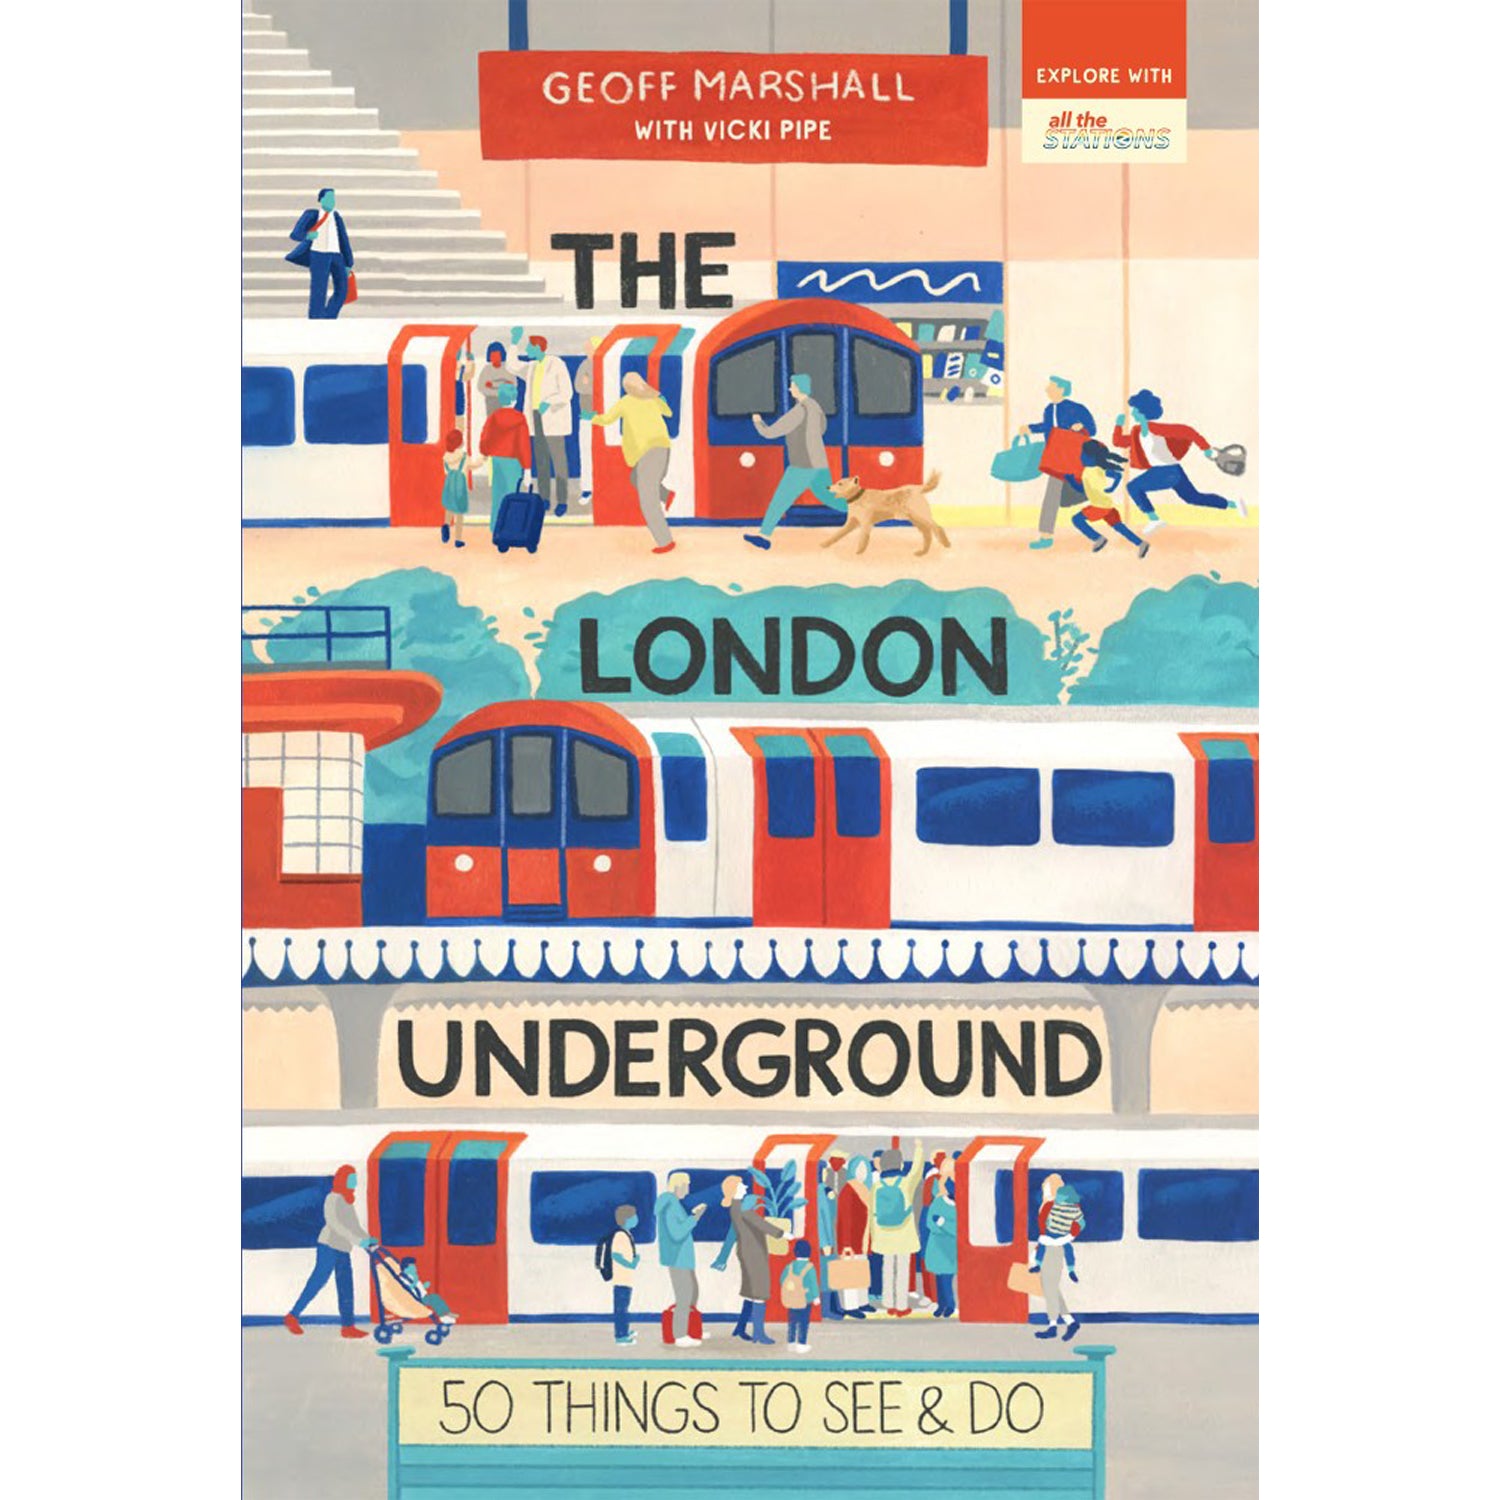 The London Underground - 50 Things To See & Do Book by Geoff Marshall with Vicki Pipe 1